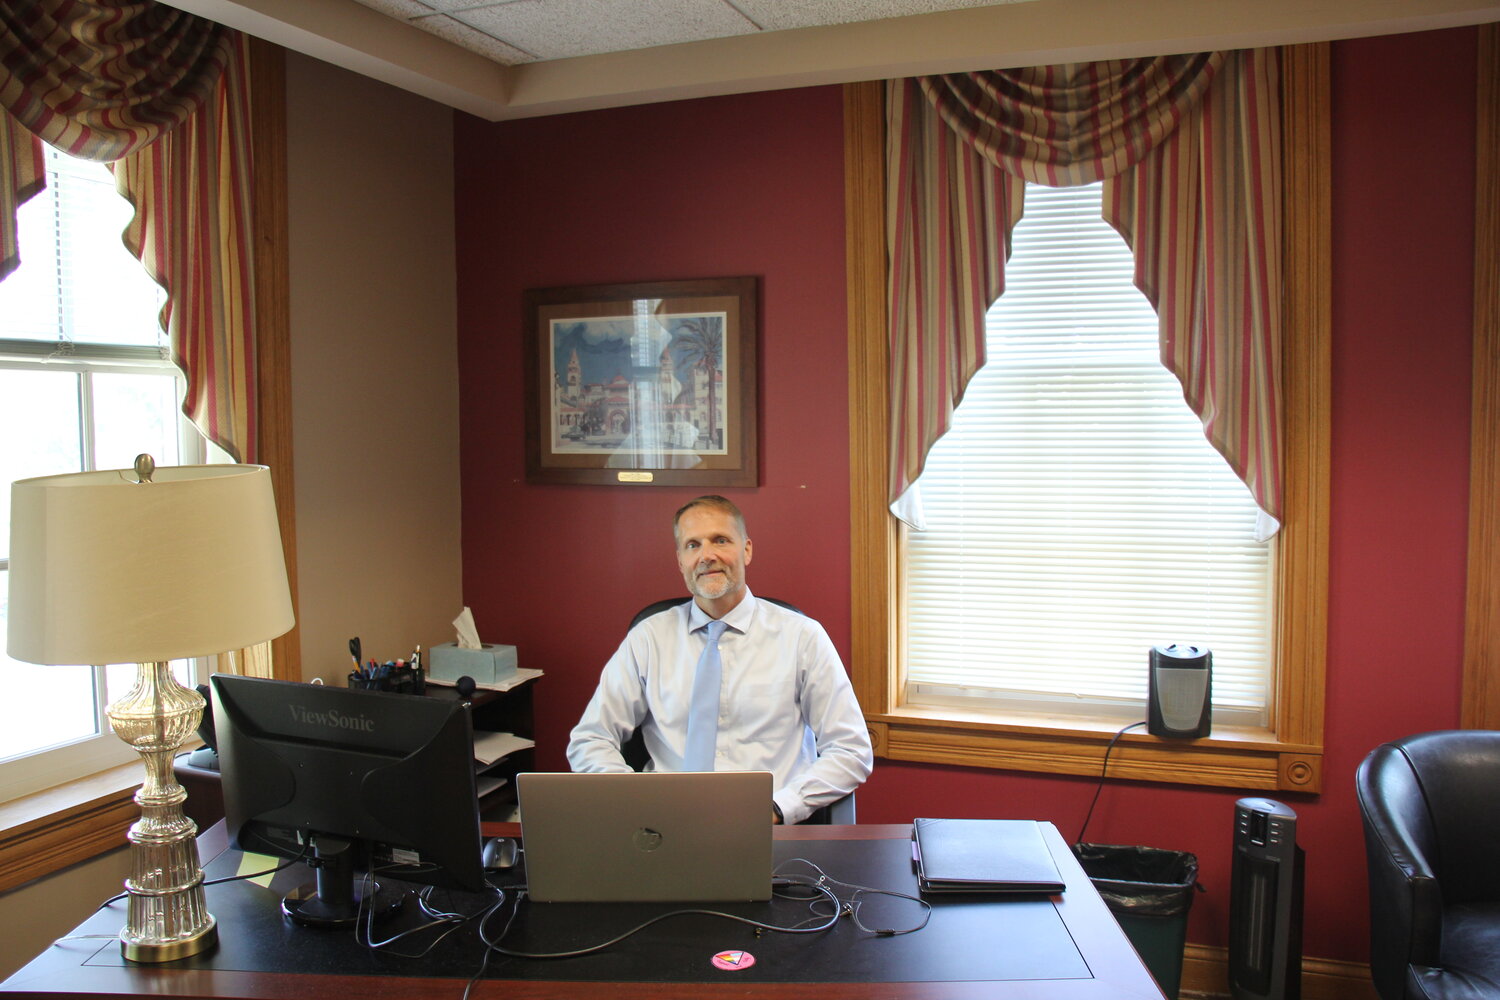 The newly hired Vice President of academic affairs, Ray Lutgring, works hard in his office to oversee all the faculty at six different campus locations.